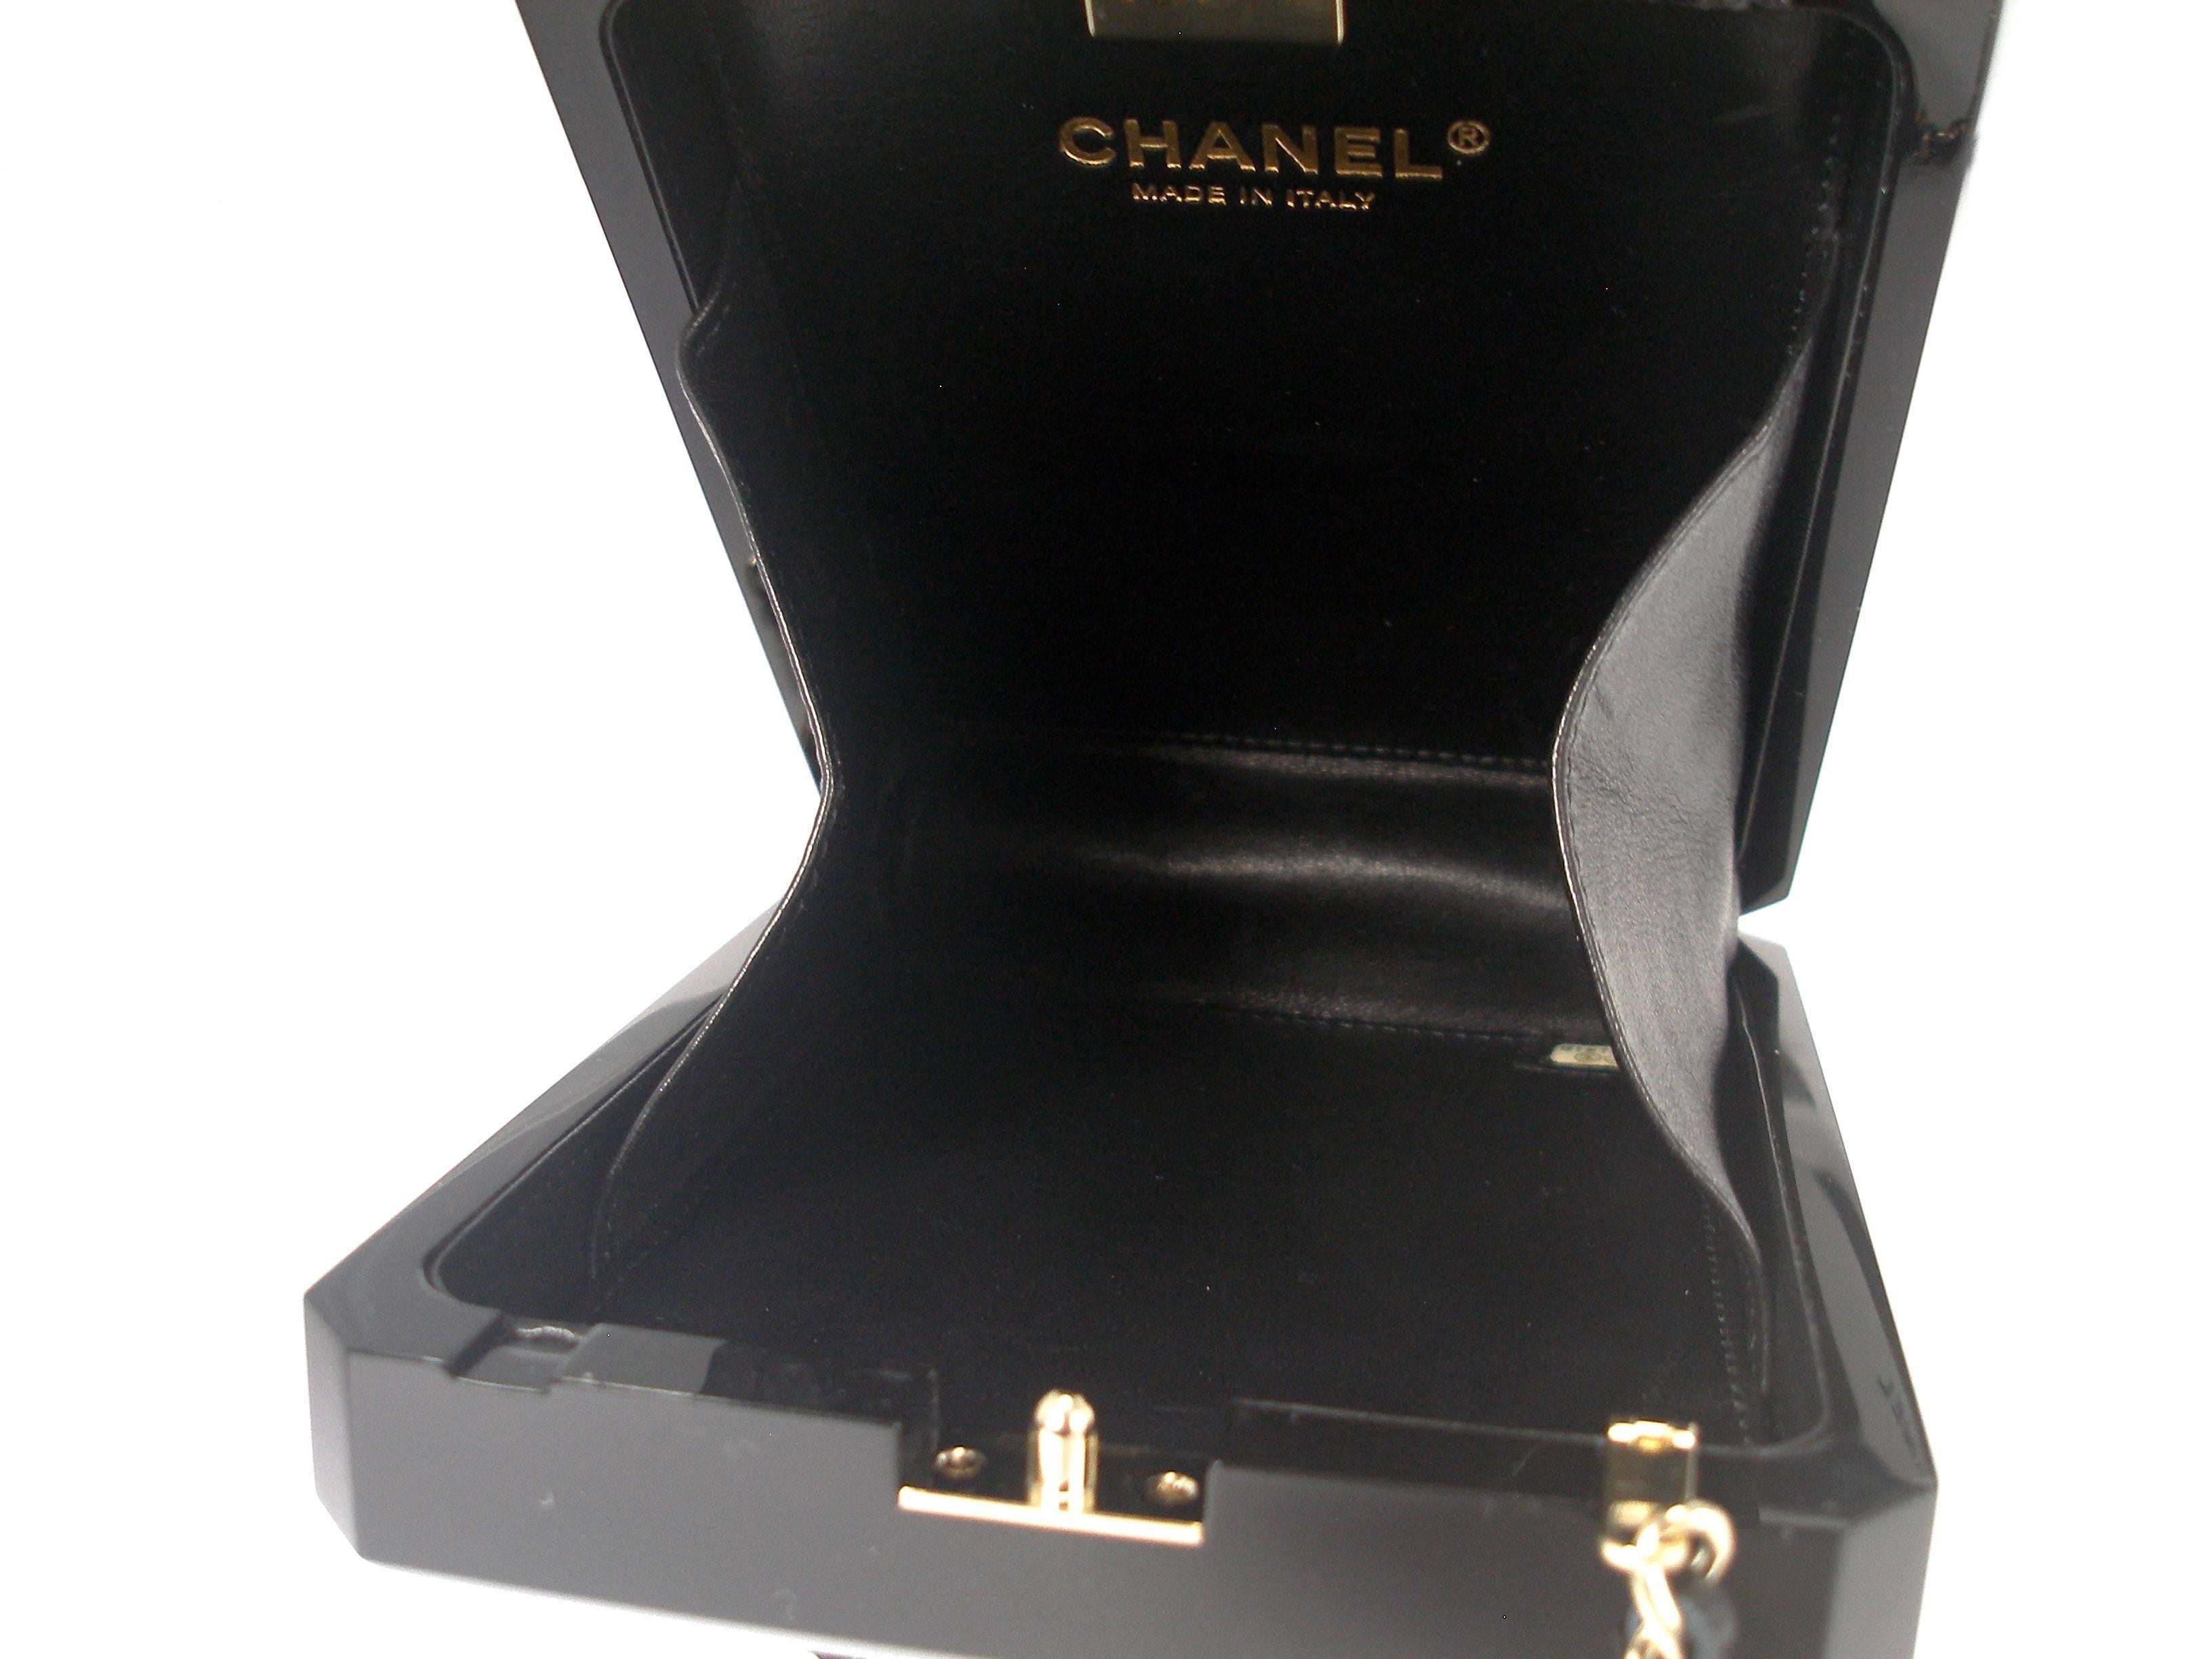 Chanel Black Perfume Bottle Bag Limited Edition / VERY RARE and COLLECTOR 3